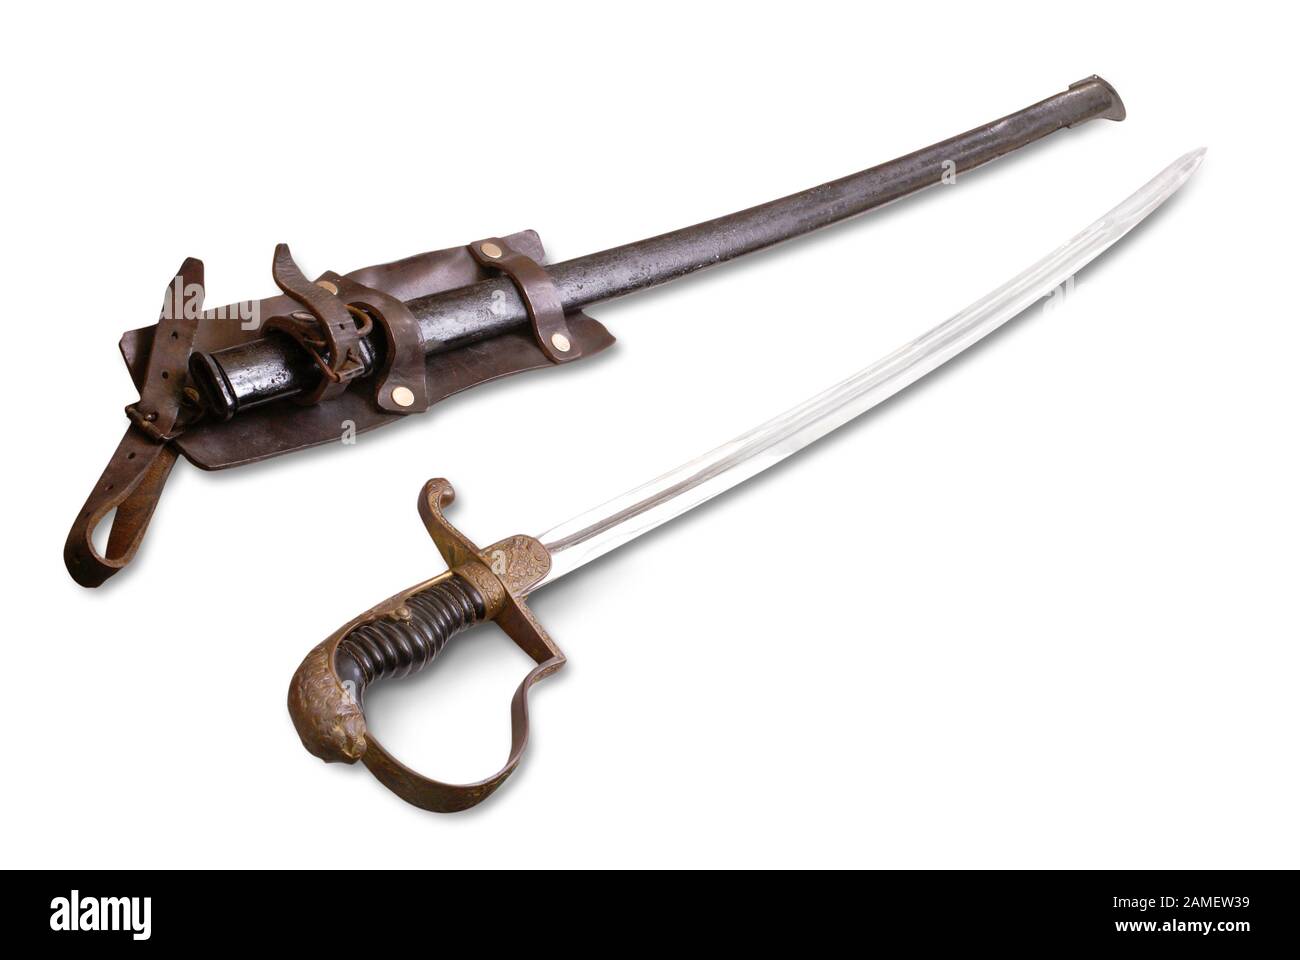 German officer saber (sabre). The 19th - 20th century. Germany. Path on the white background. Stock Photo